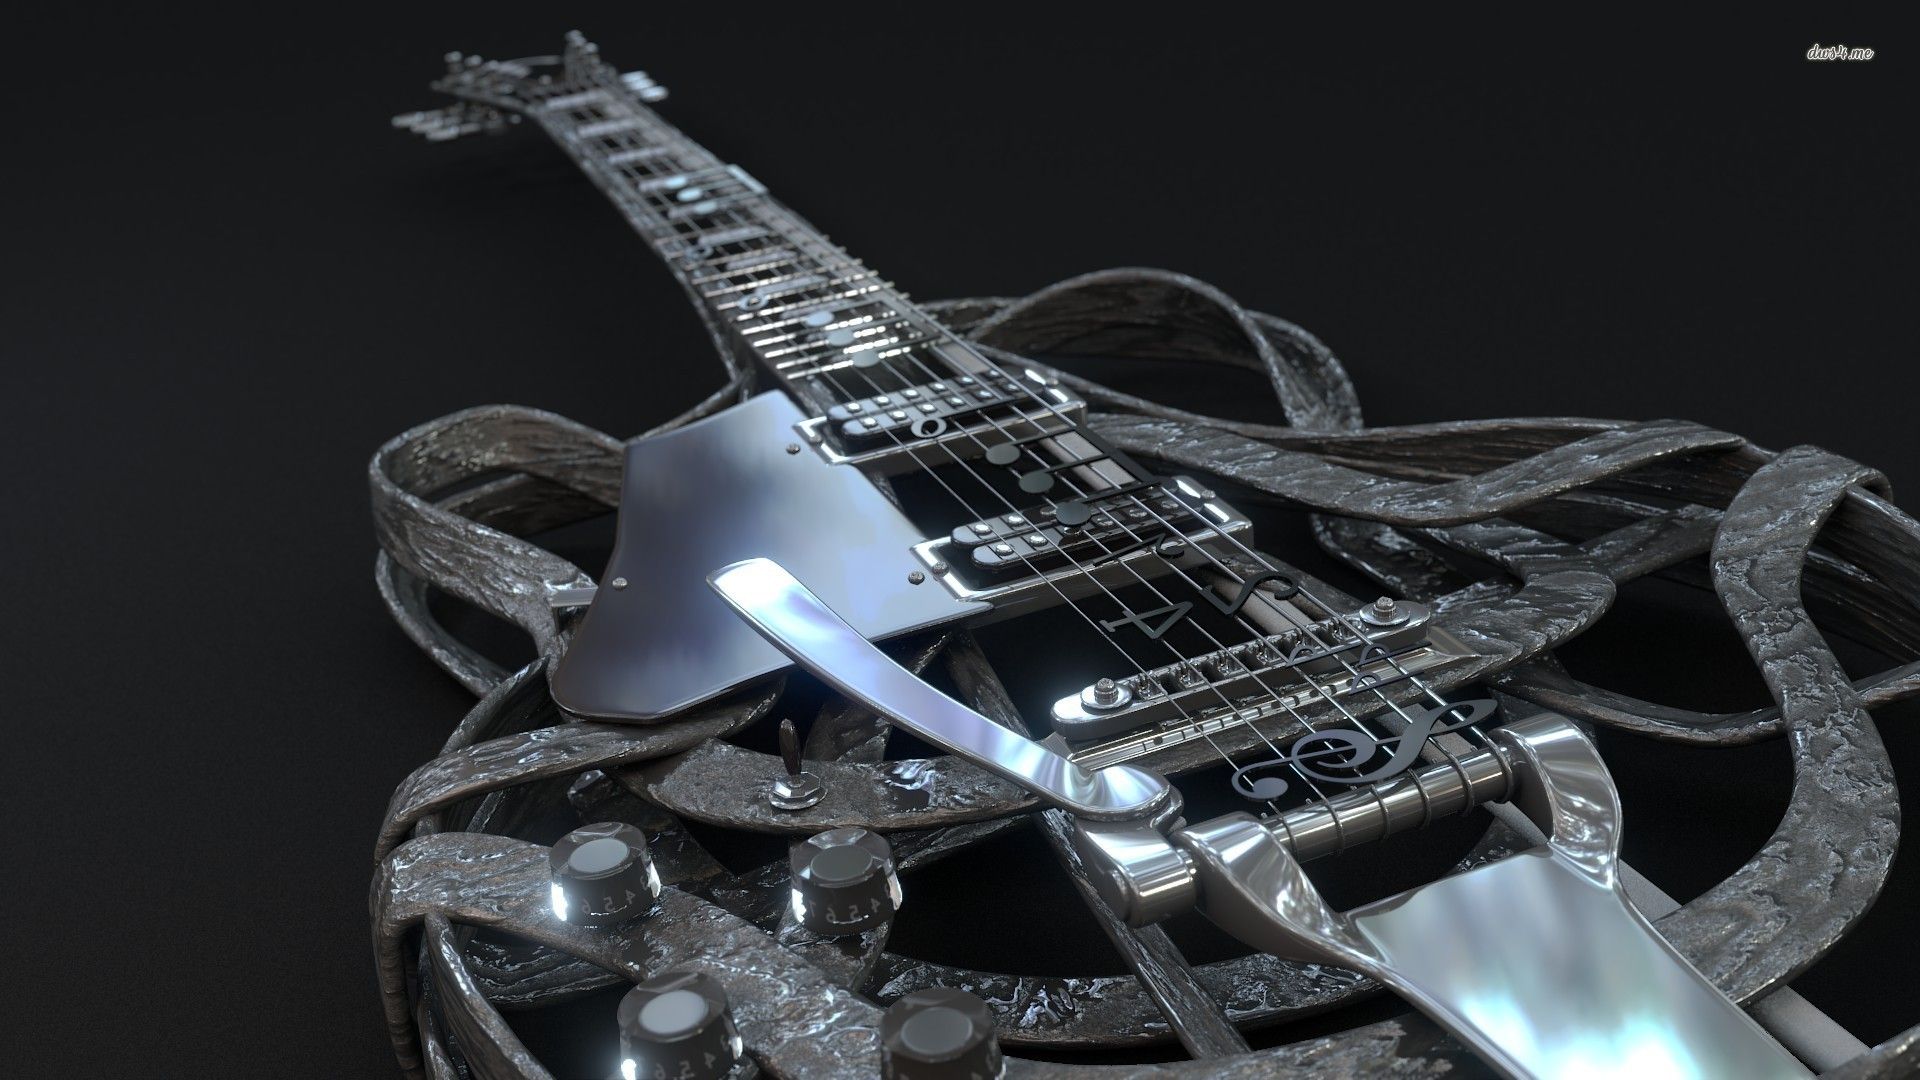 Stylized guitar wallpaper - Music wallpapers - #11073